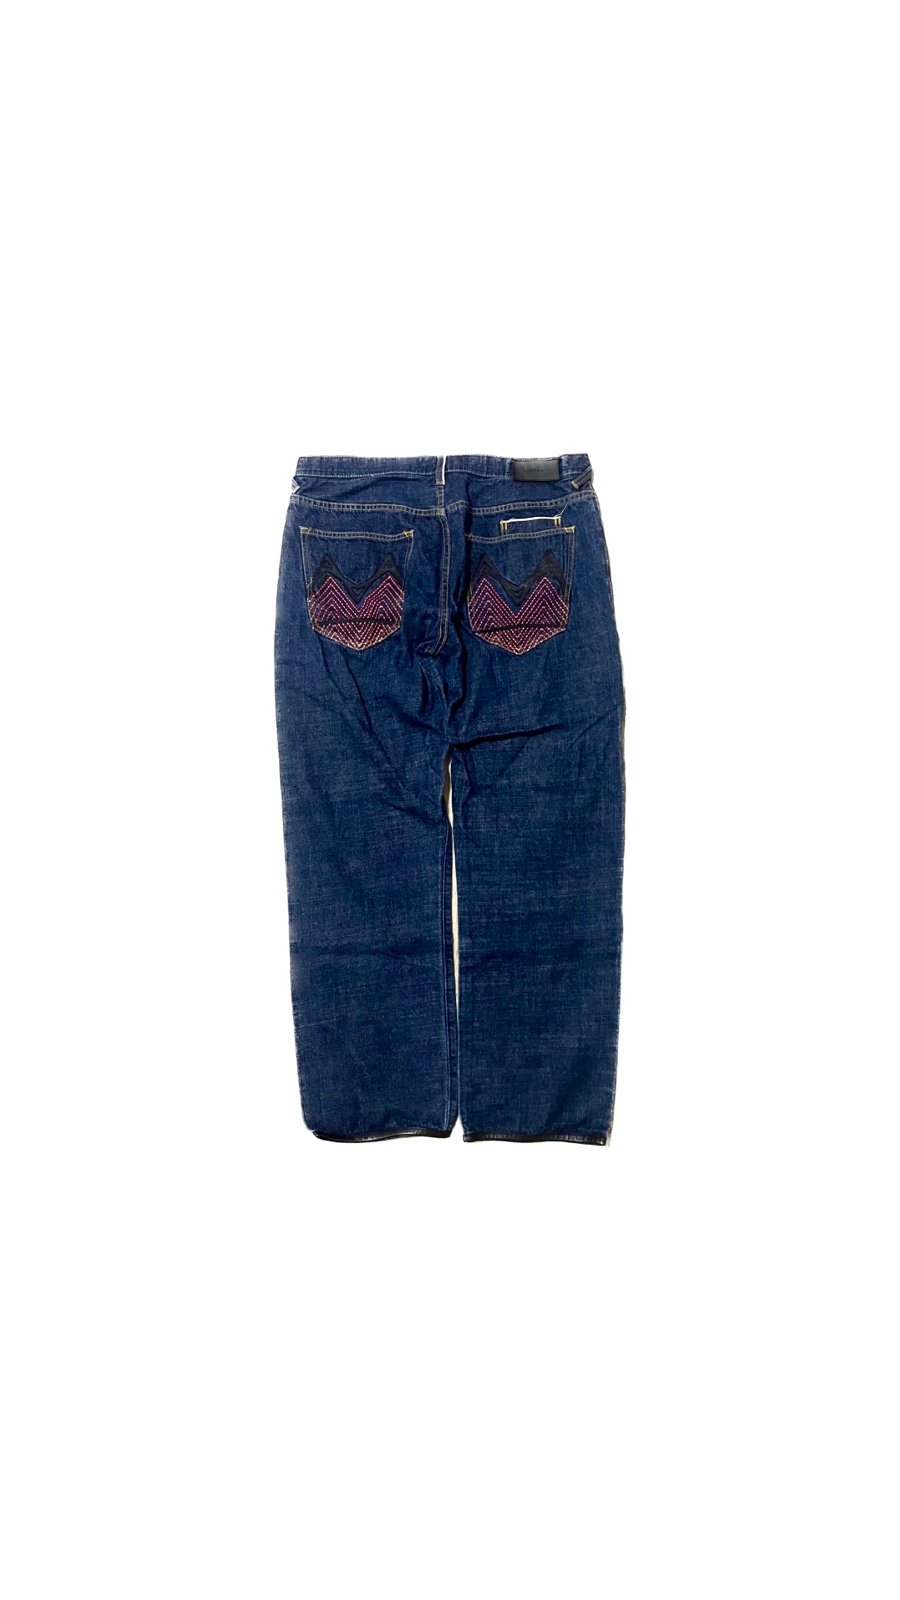 sean john jeans with embroidered & printed design on ba